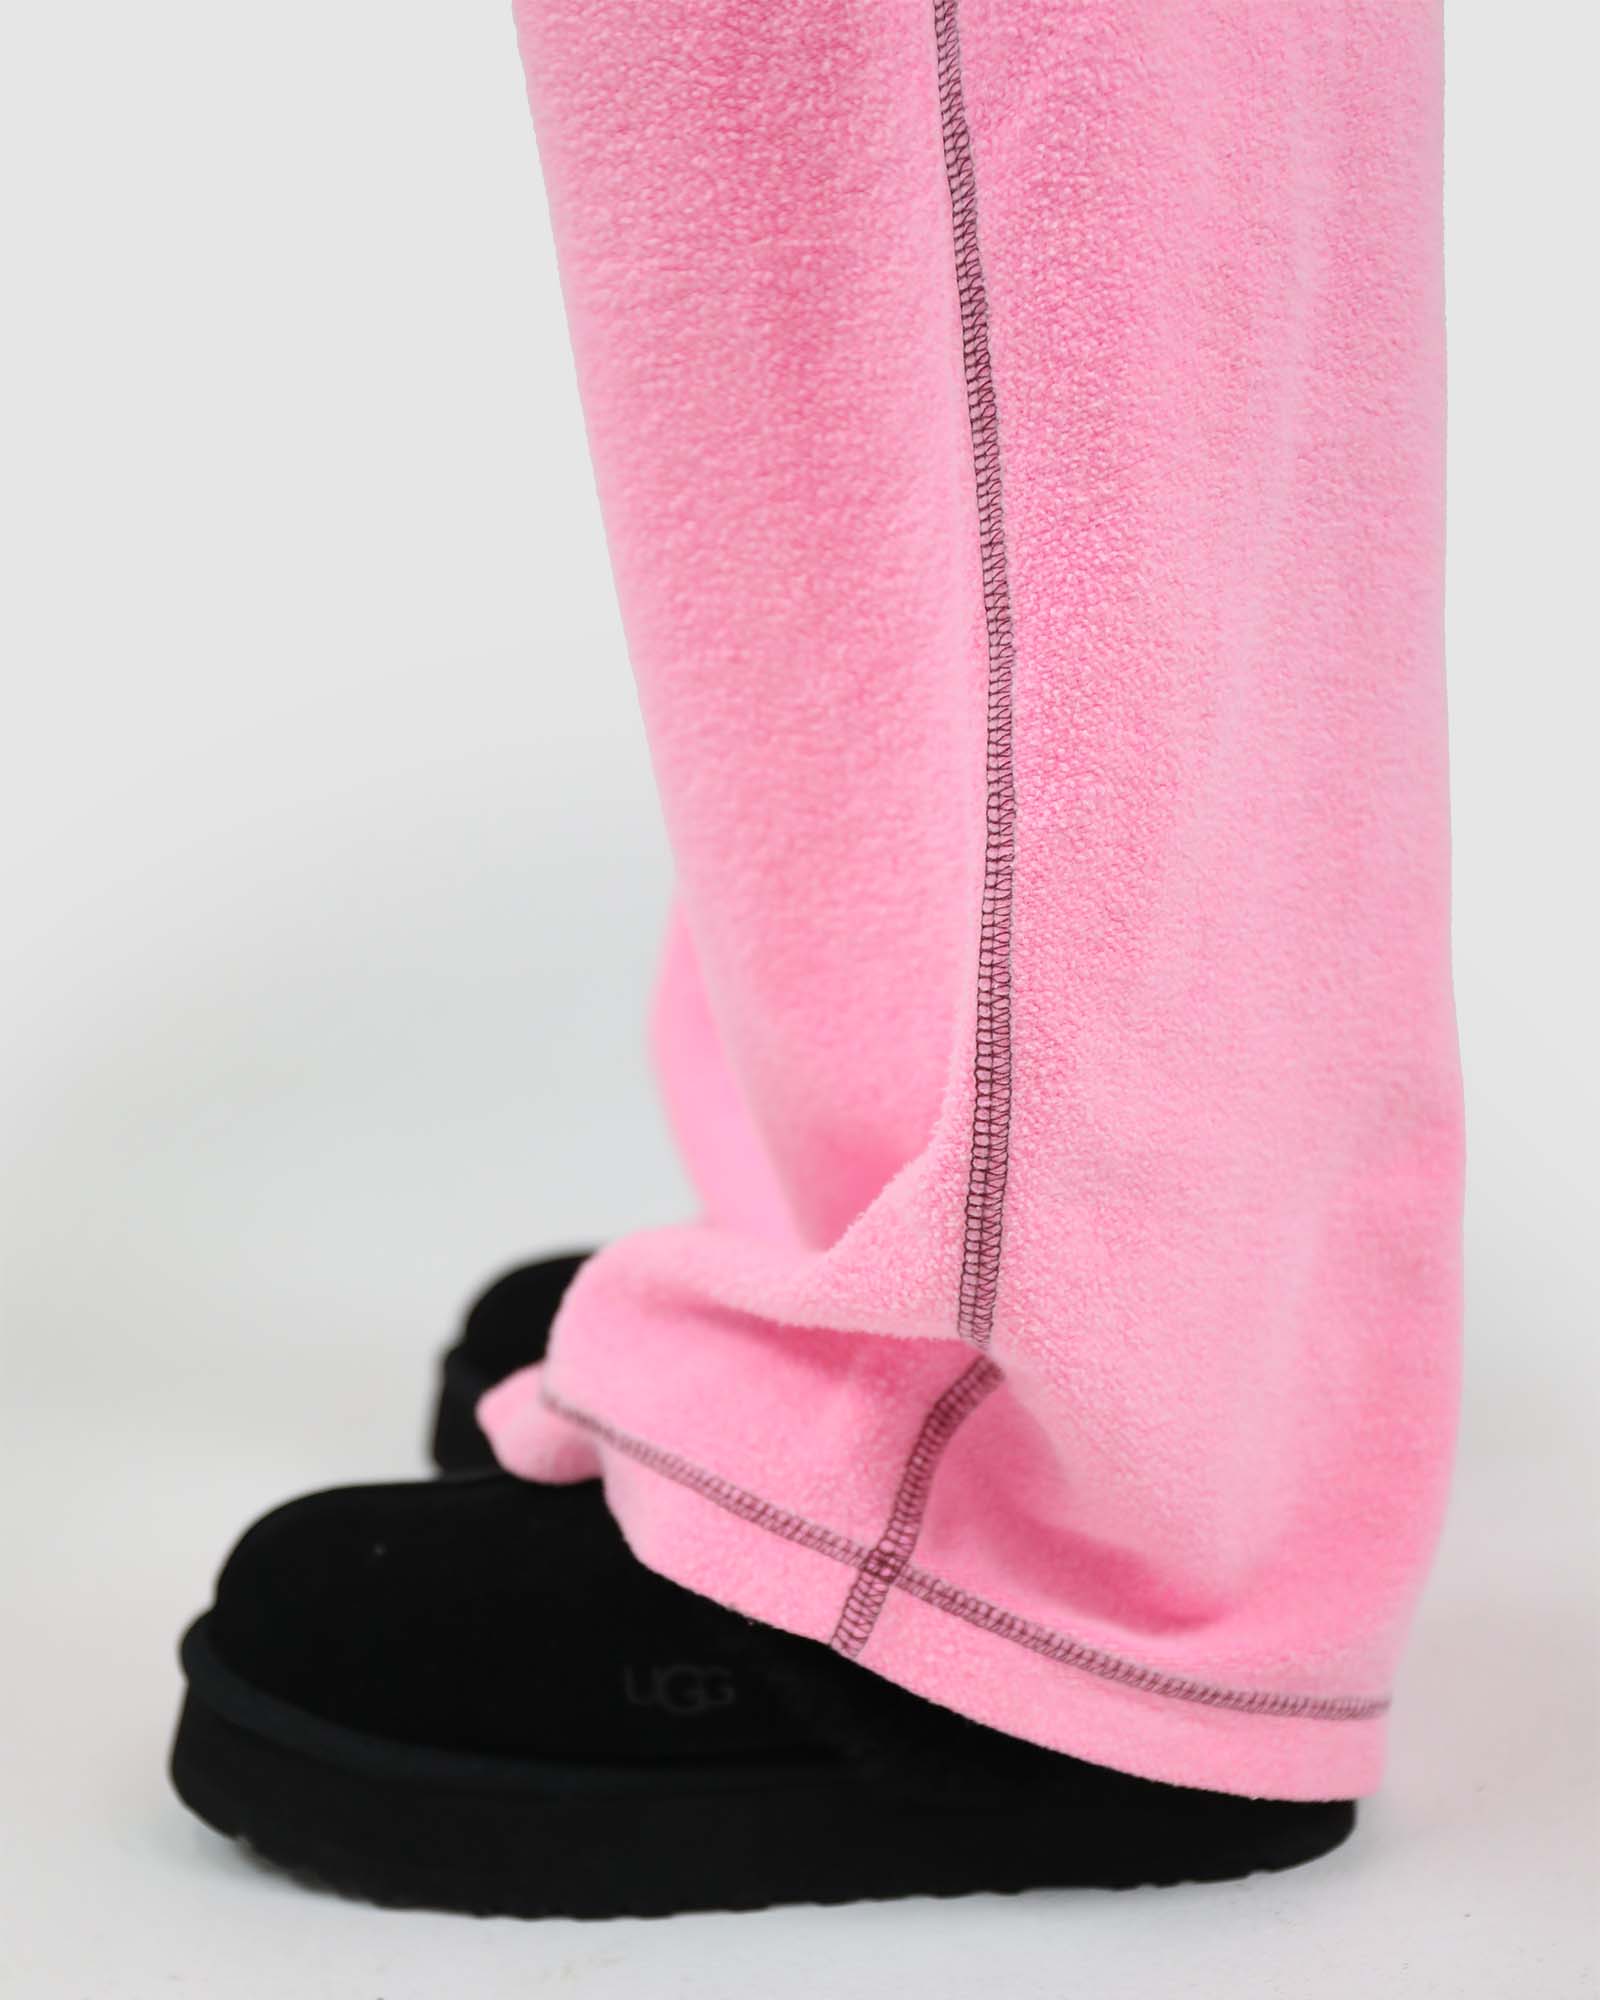 Reverse Track Pant: Pink